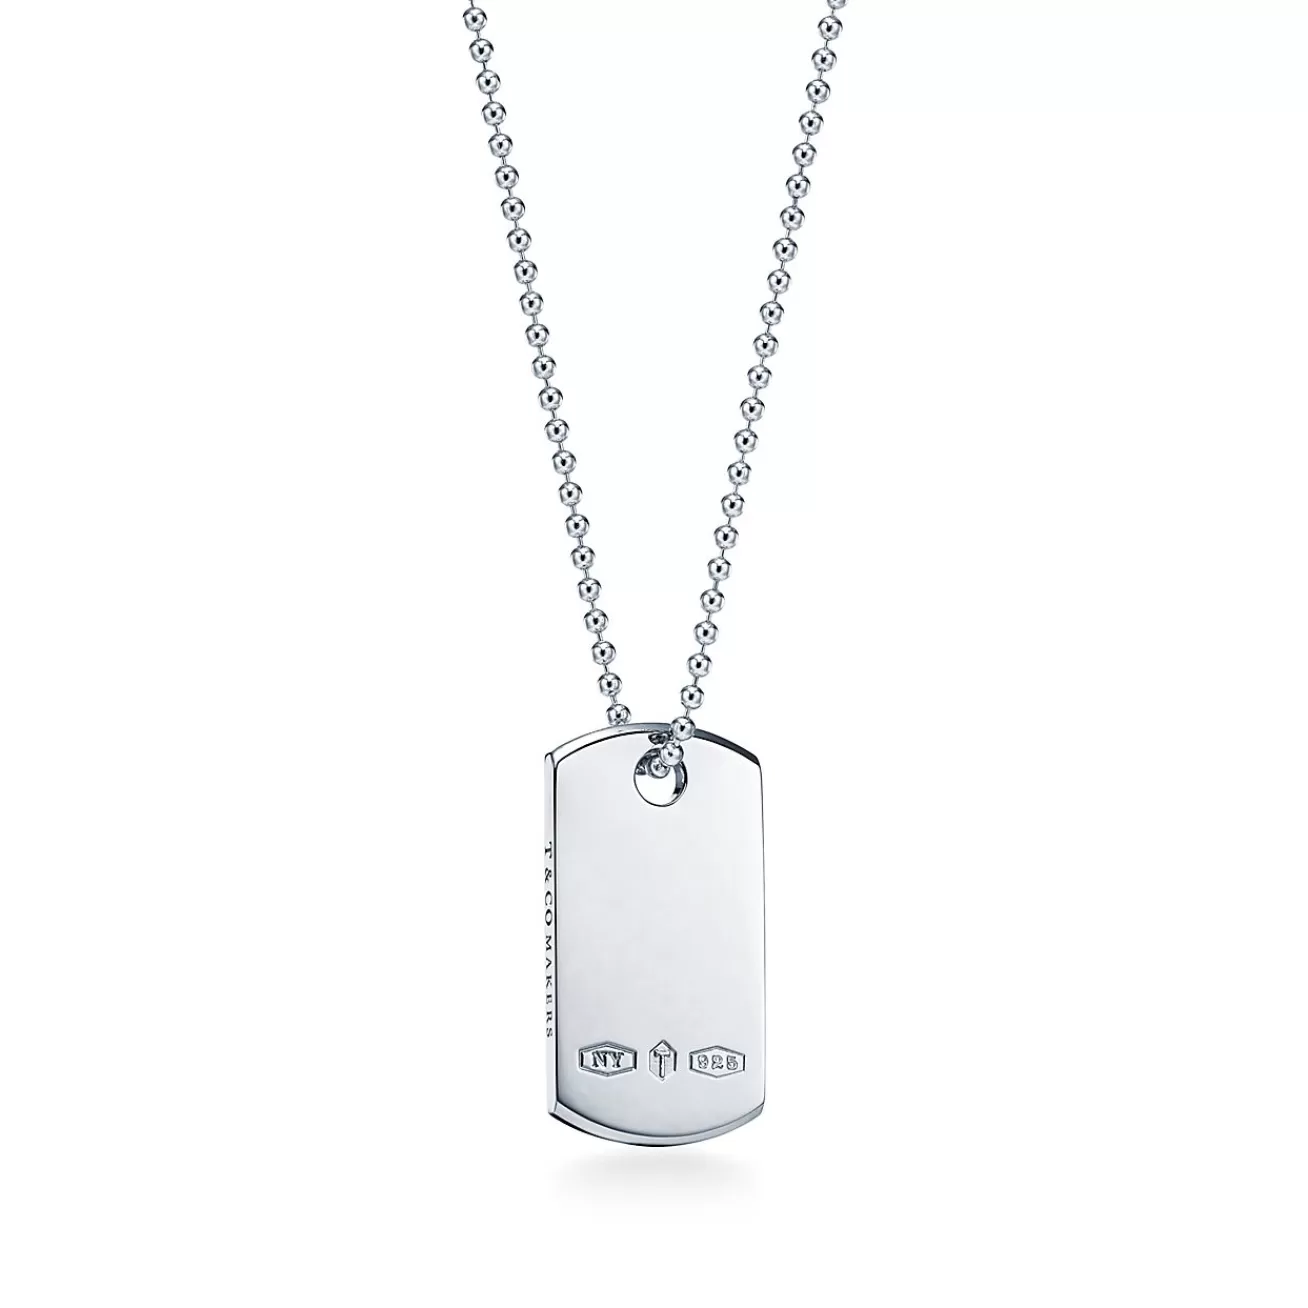 Tiffany & Co. Tiffany 1837® Makers I.D. tag pendant in sterling silver, 24". | ^ Necklaces & Pendants | Men's Jewelry